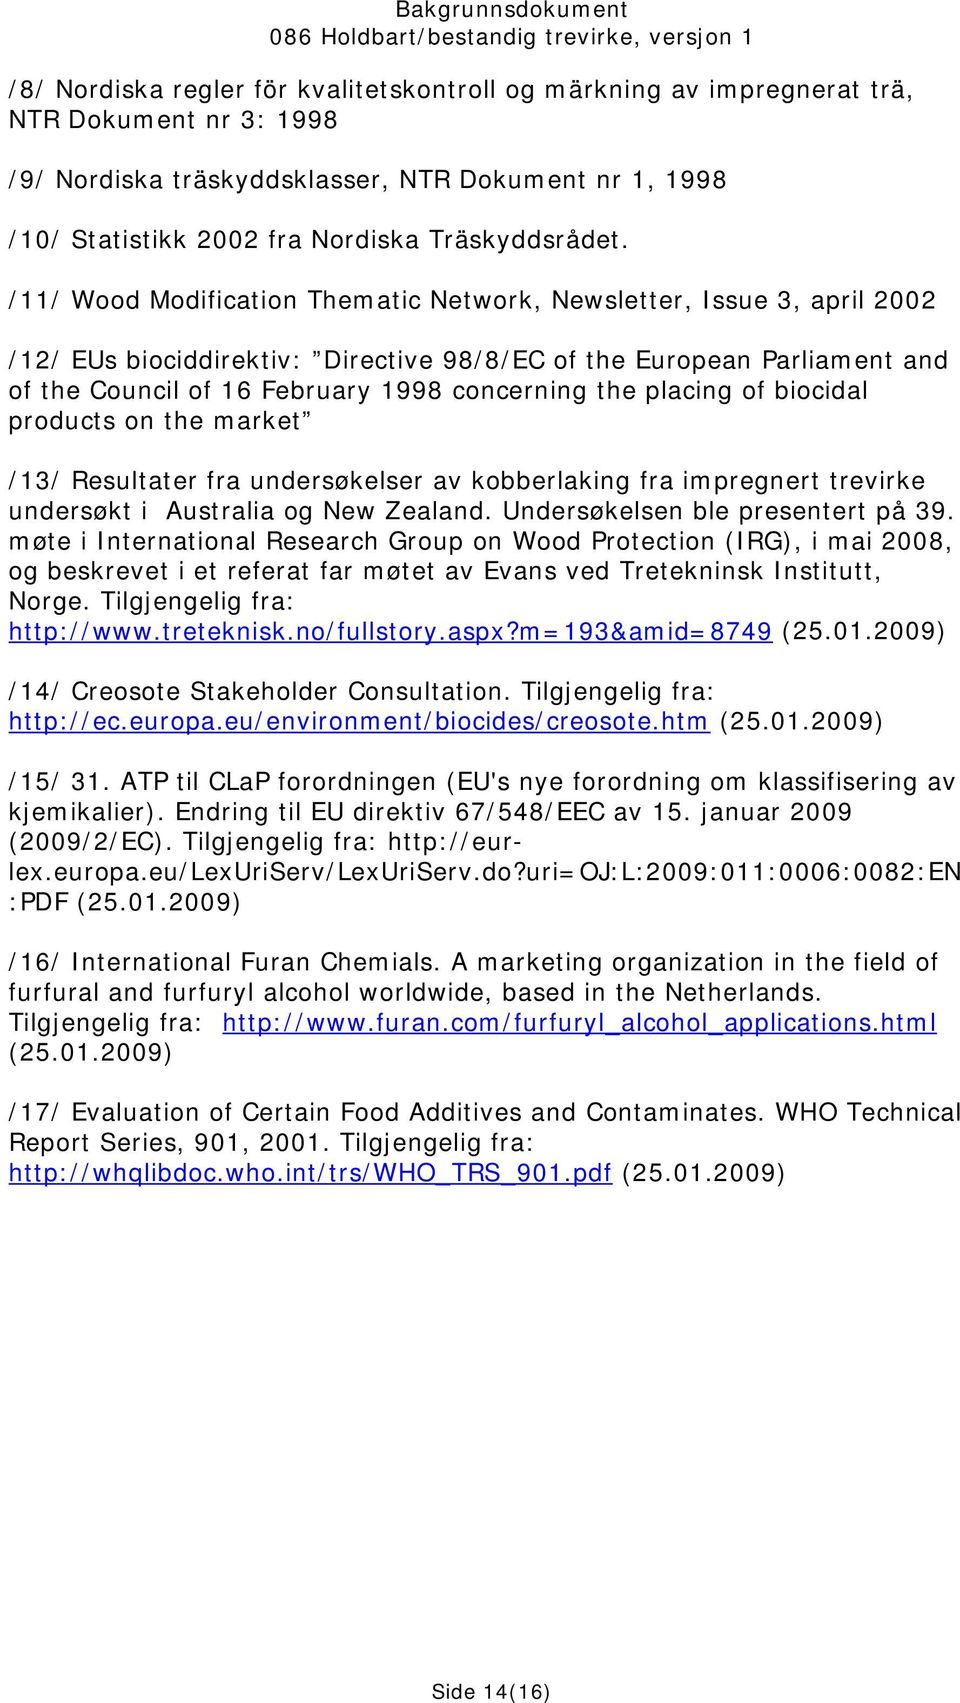 /11/ Wood Modification Thematic Network, Newsletter, Issue 3, april 2002 /12/ EUs biociddirektiv: Directive 98/8/EC of the European Parliament and of the Council of 16 February 1998 concerning the